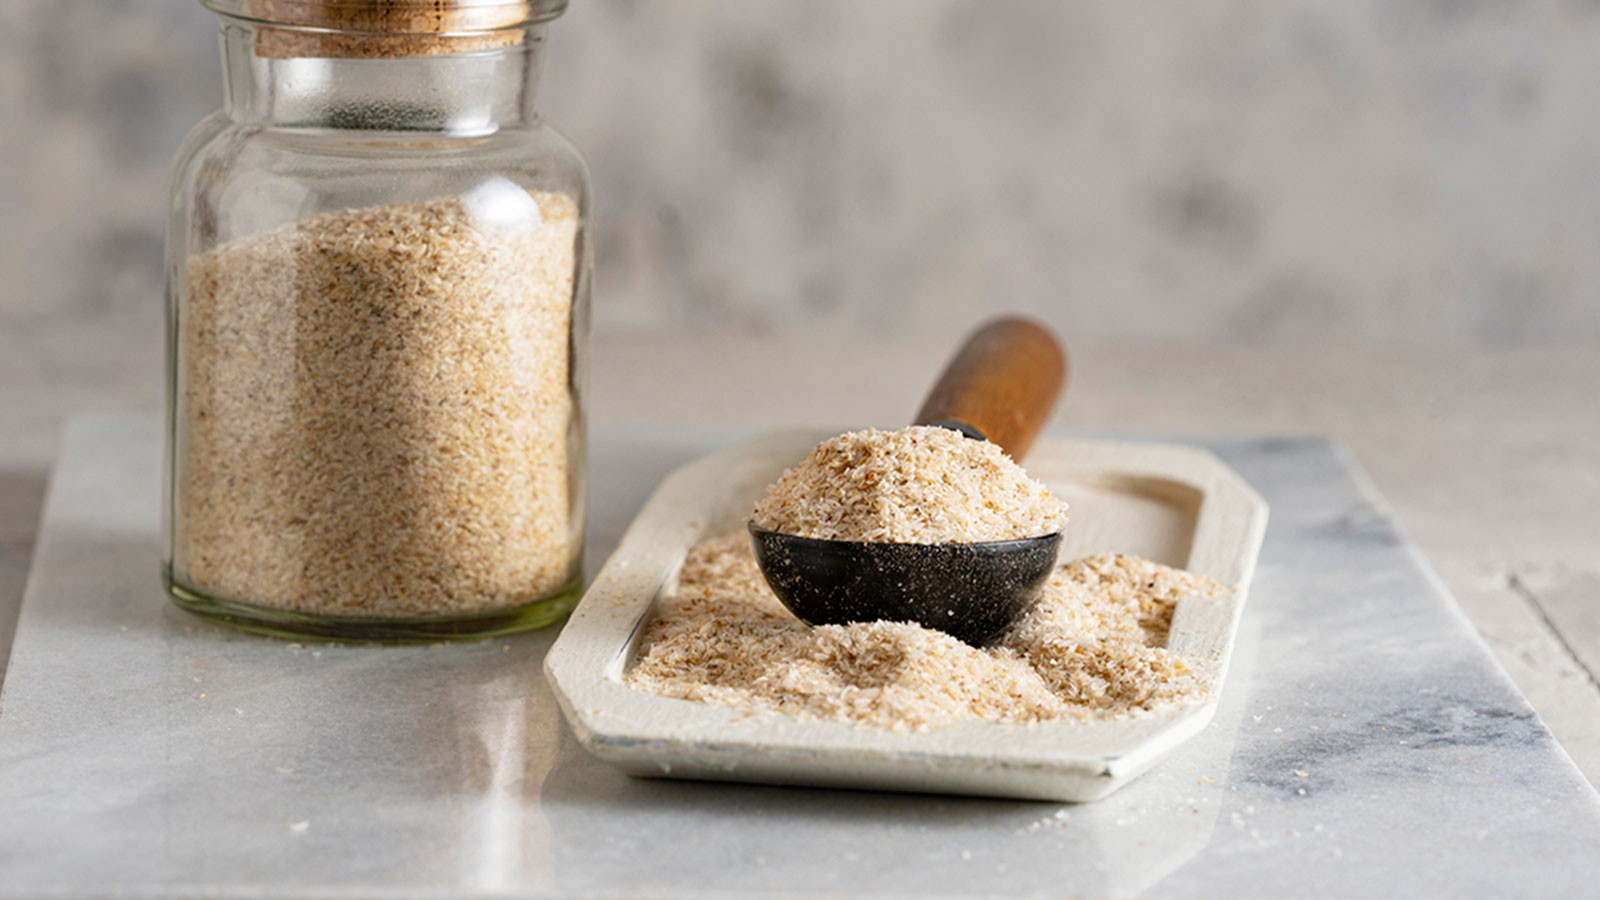 Psyllium Husk: Benefits, Dosage, Side Effects, and Sources